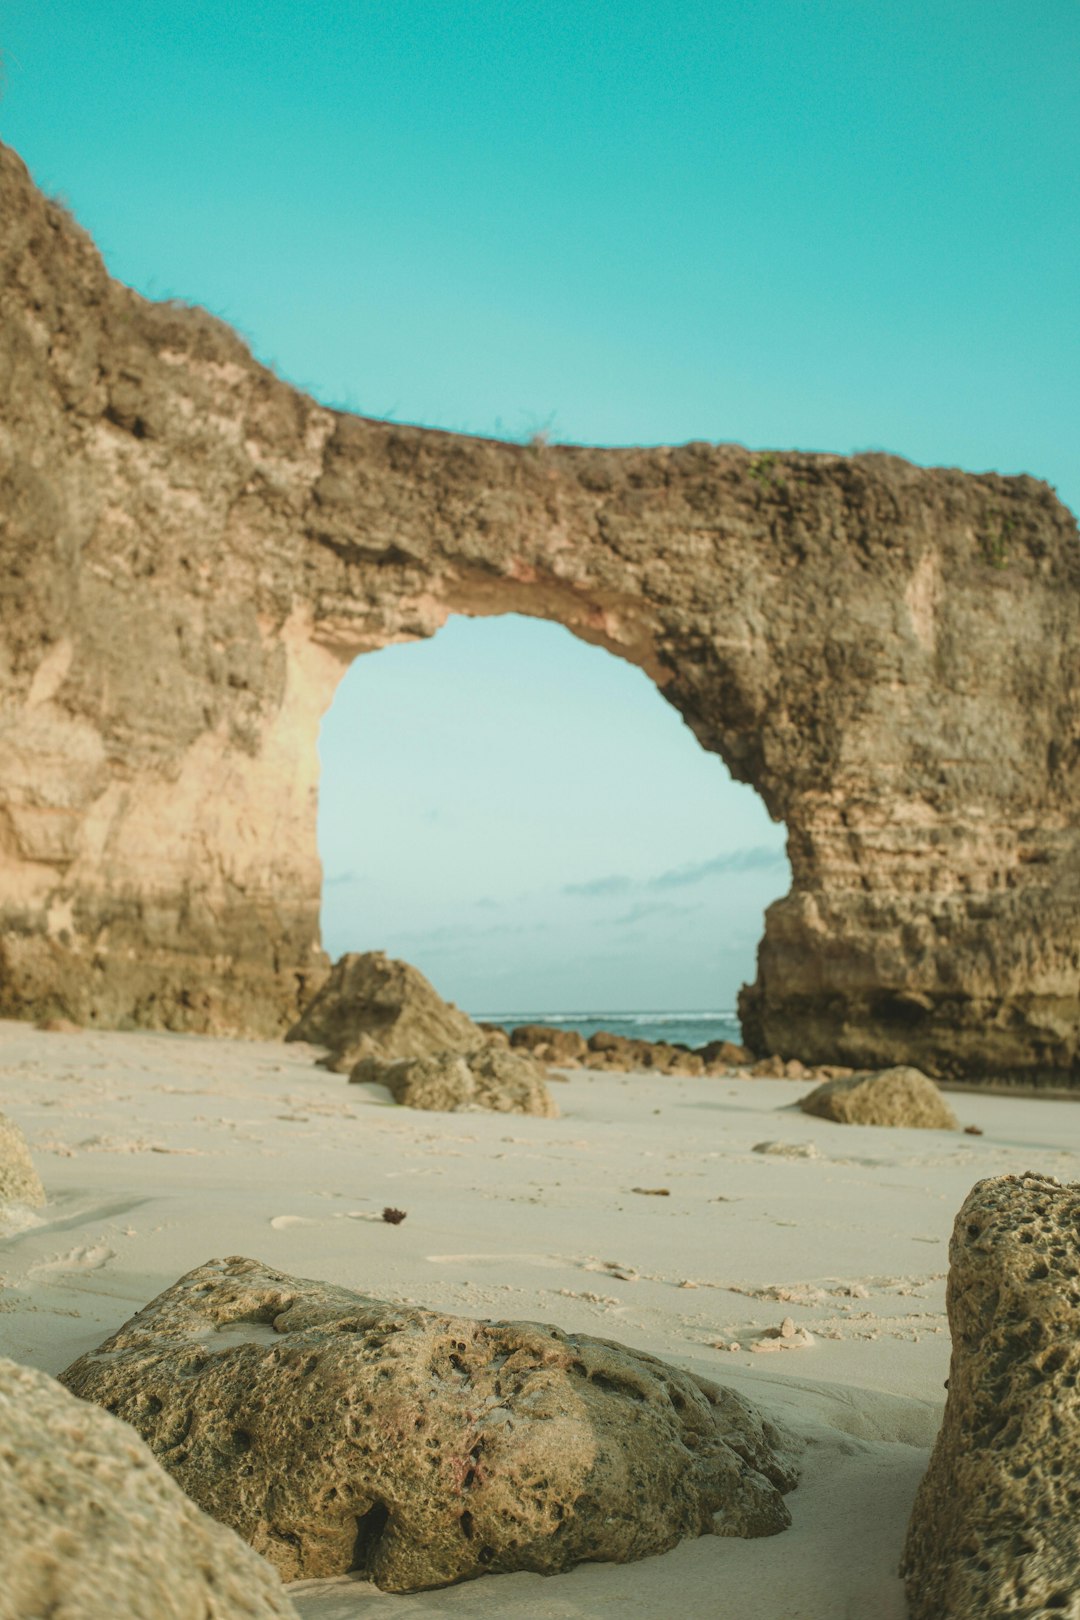 travelers stories about Natural arch in Pantai Mbawana, Indonesia